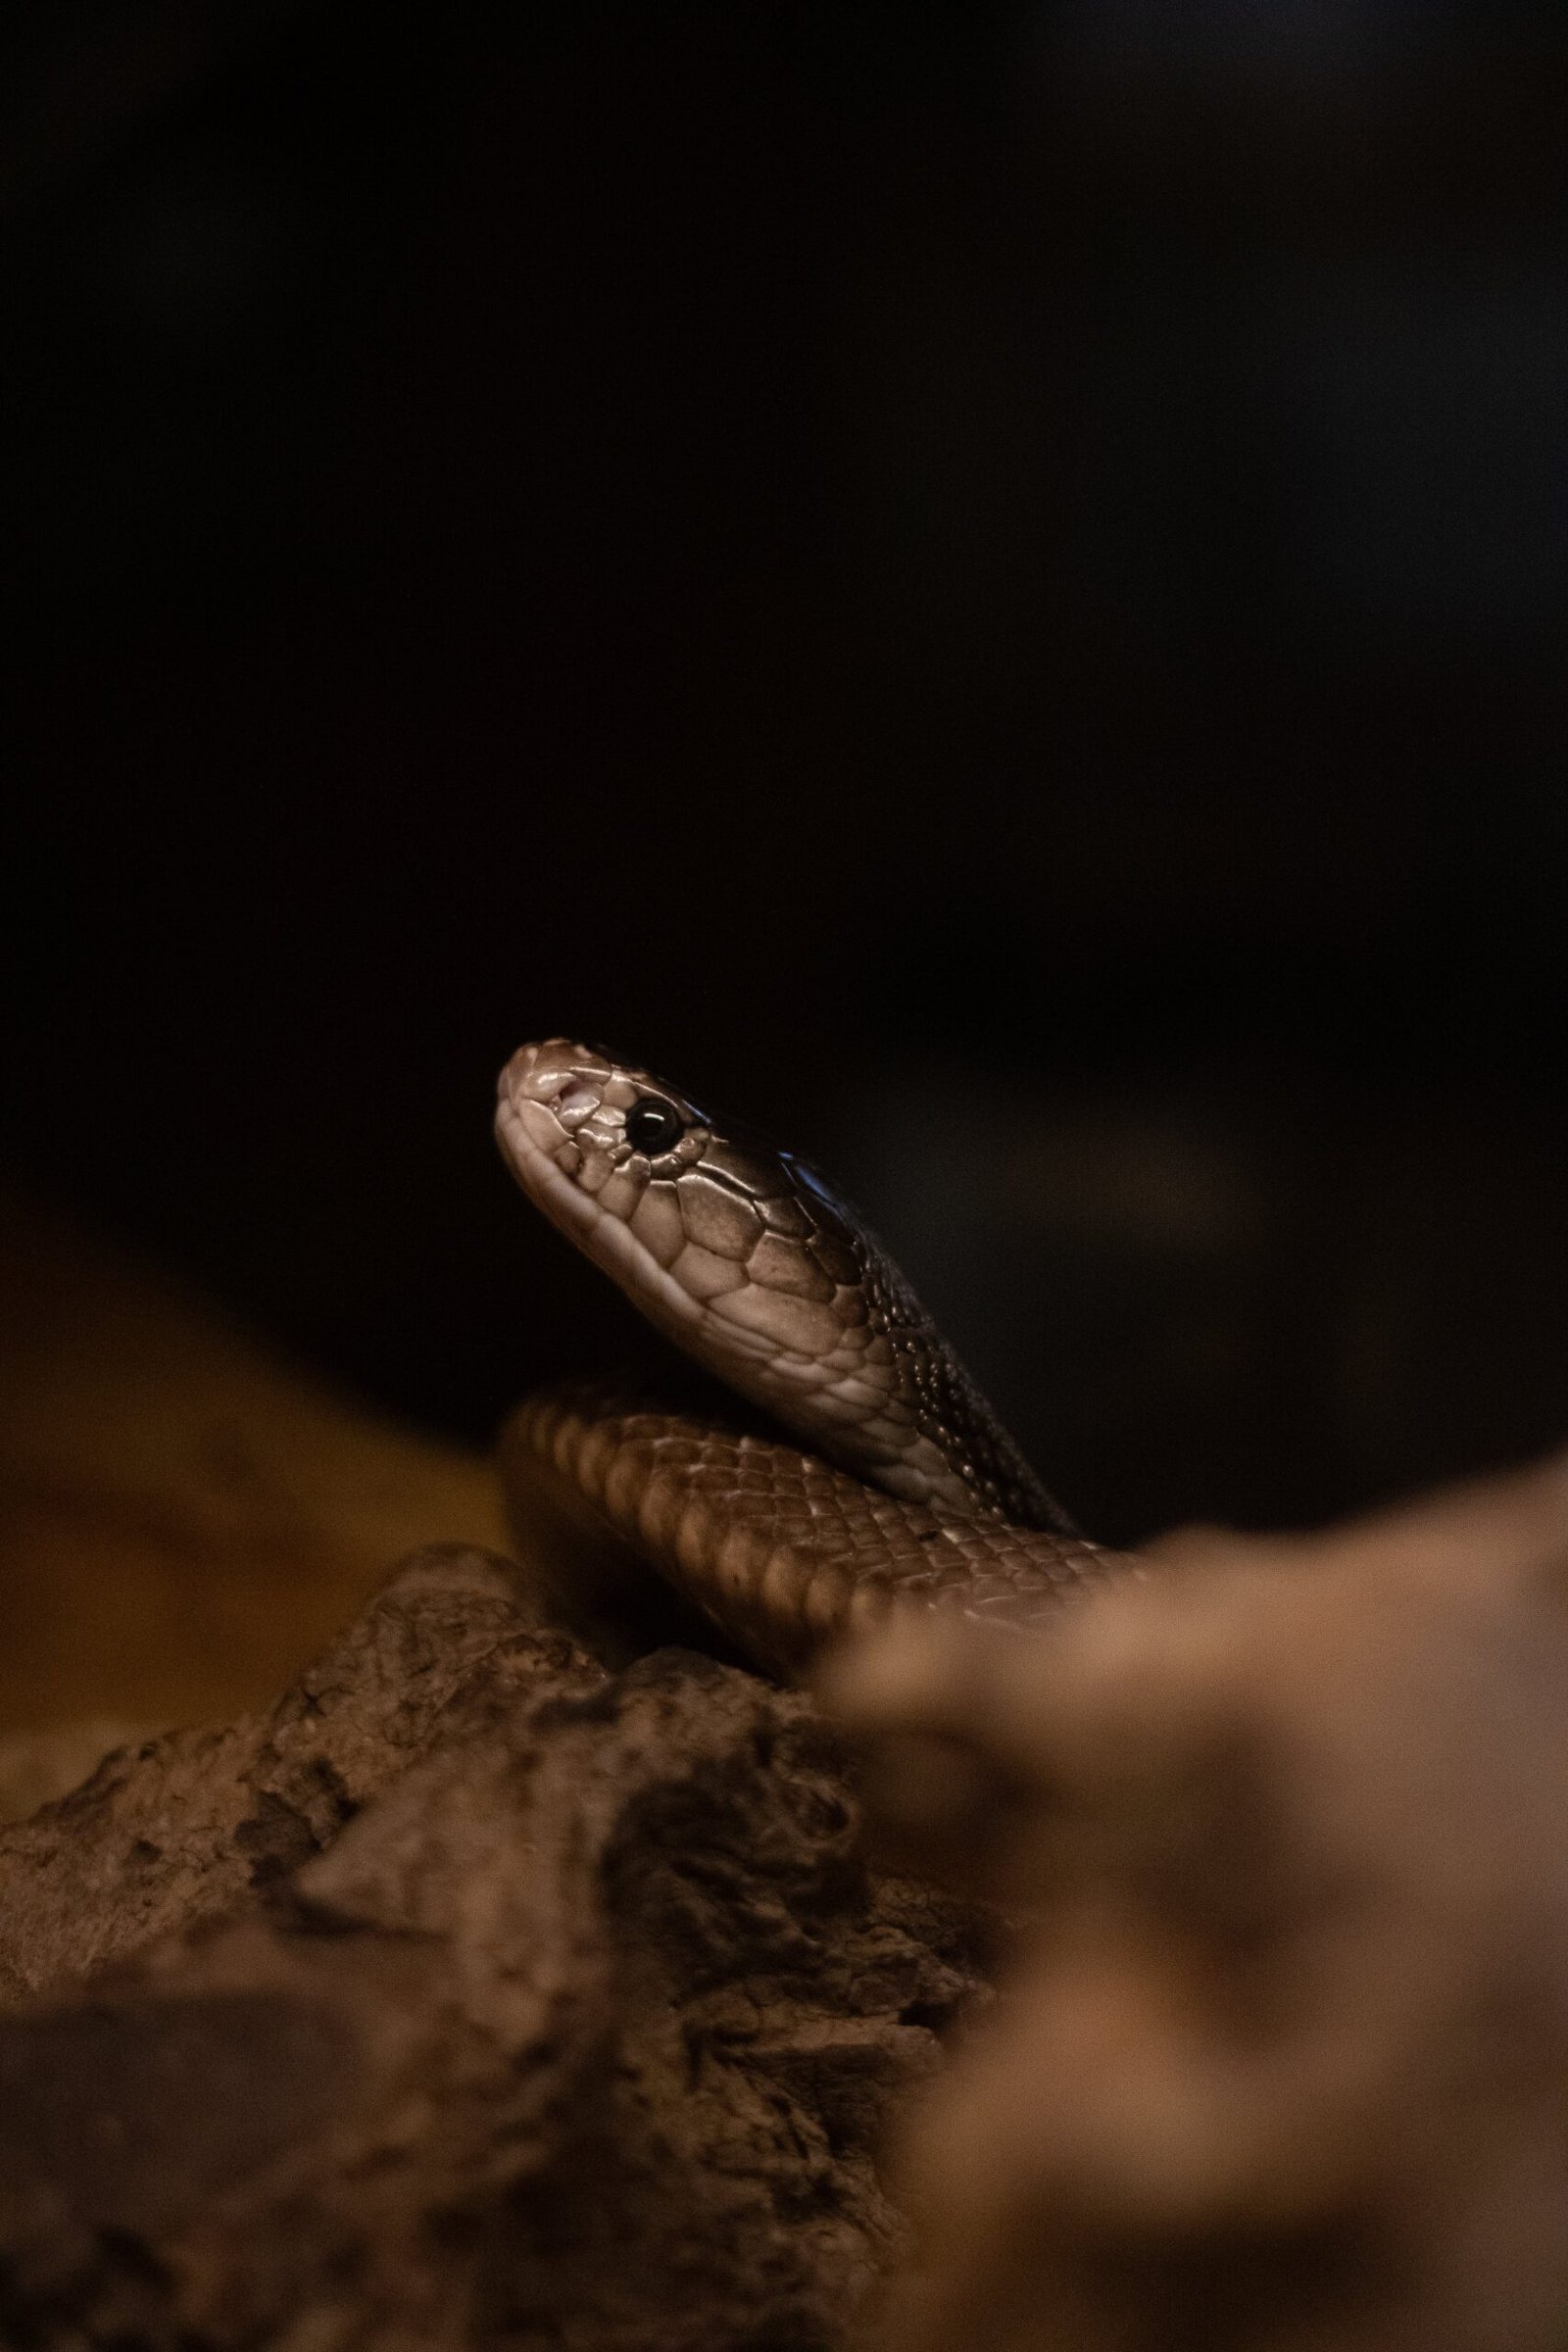 snakes can sense earthquakes before they happen